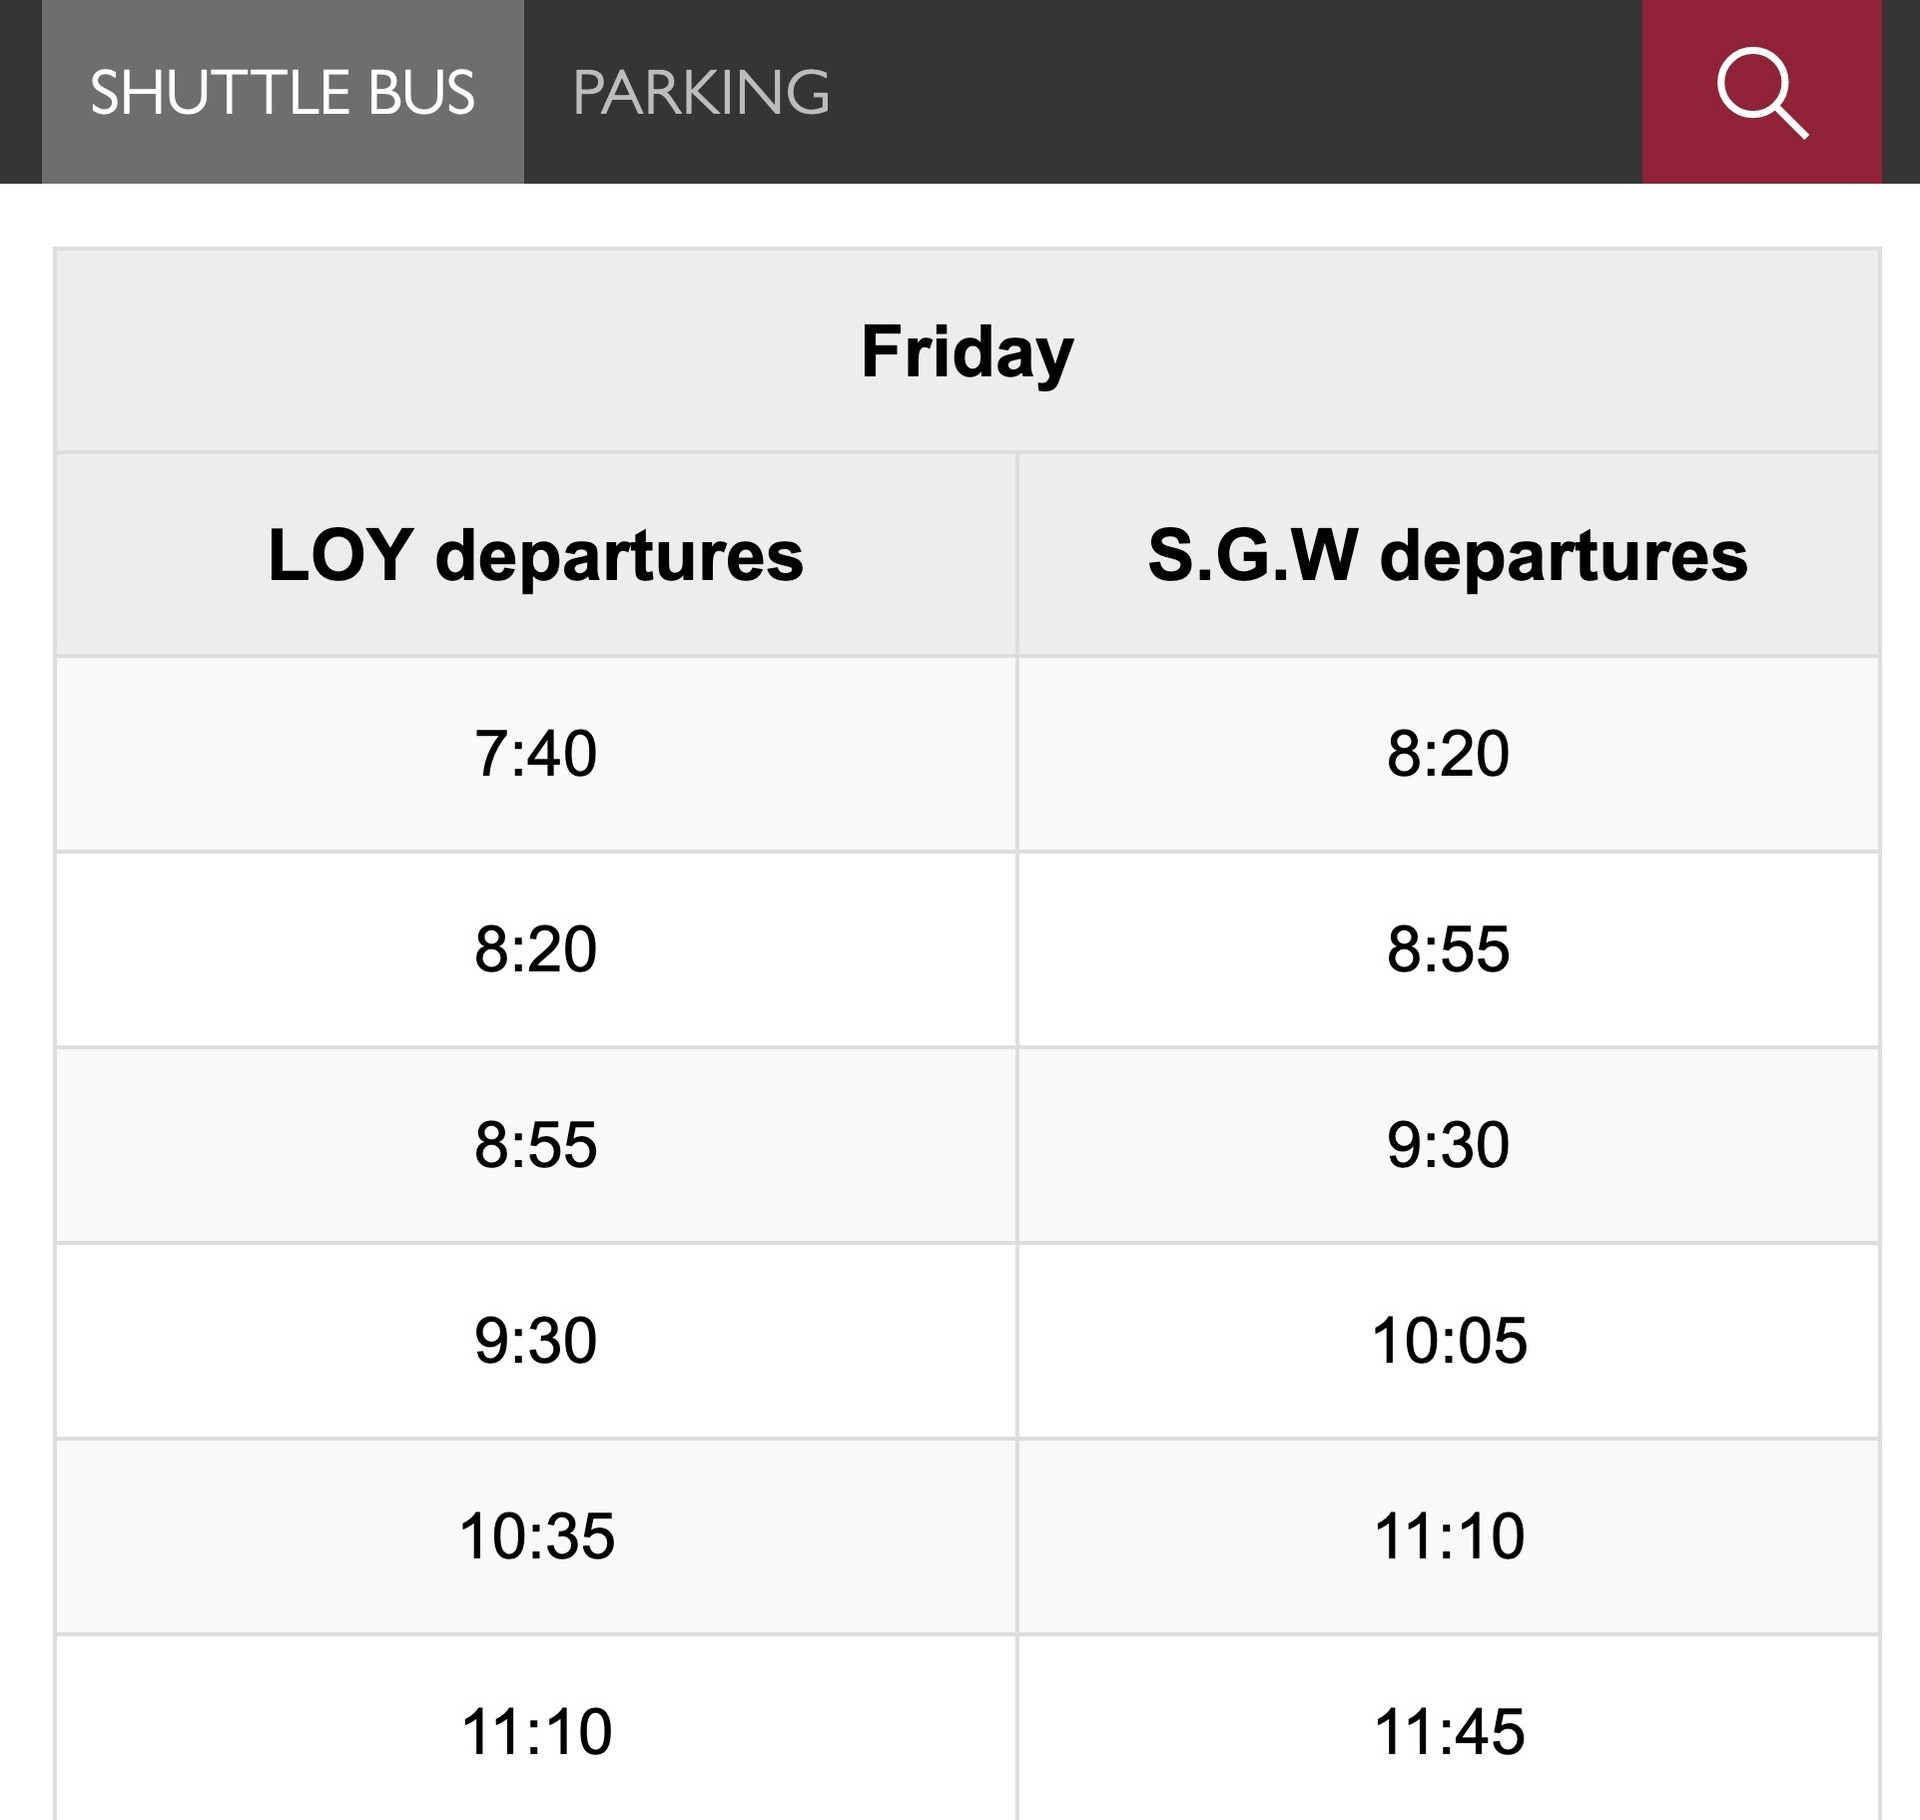 Screenshot showing times of shuttle bus departures on Fridays from Loyola and Sir George Williams. Alternate rows are shaded for easy scanning.